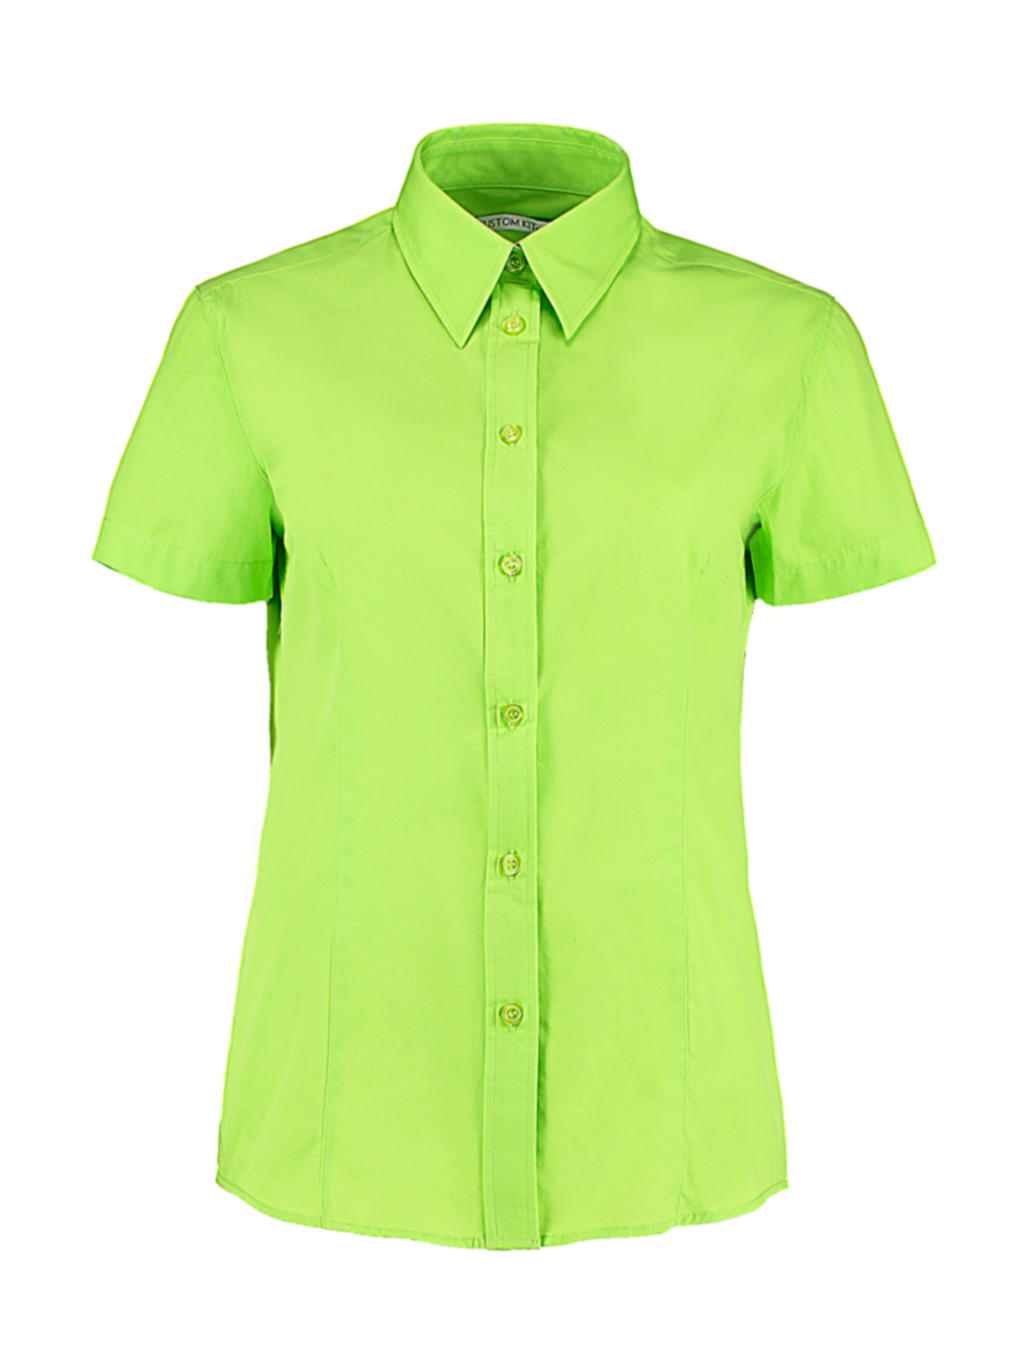 728.11 / Women`s Classic Fit Workforce Shirt / Lime